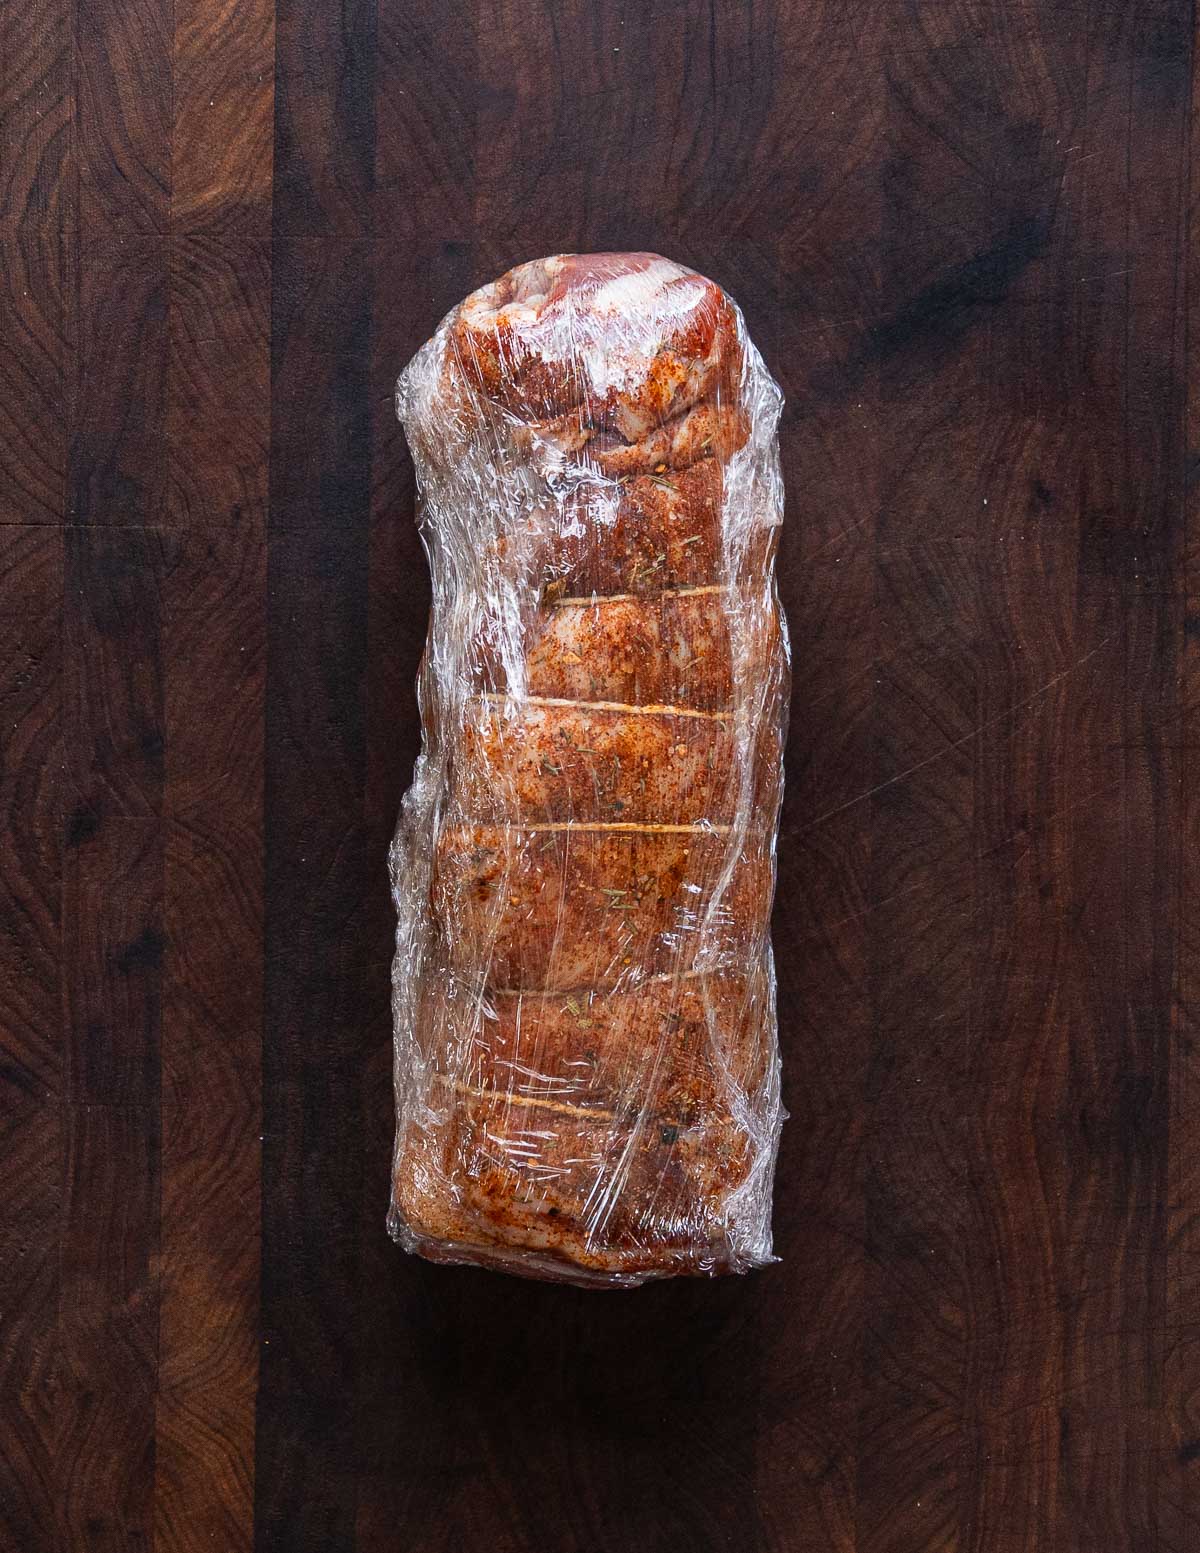 Wrapping a lamb breast in cling film after smoking to keep it moist.